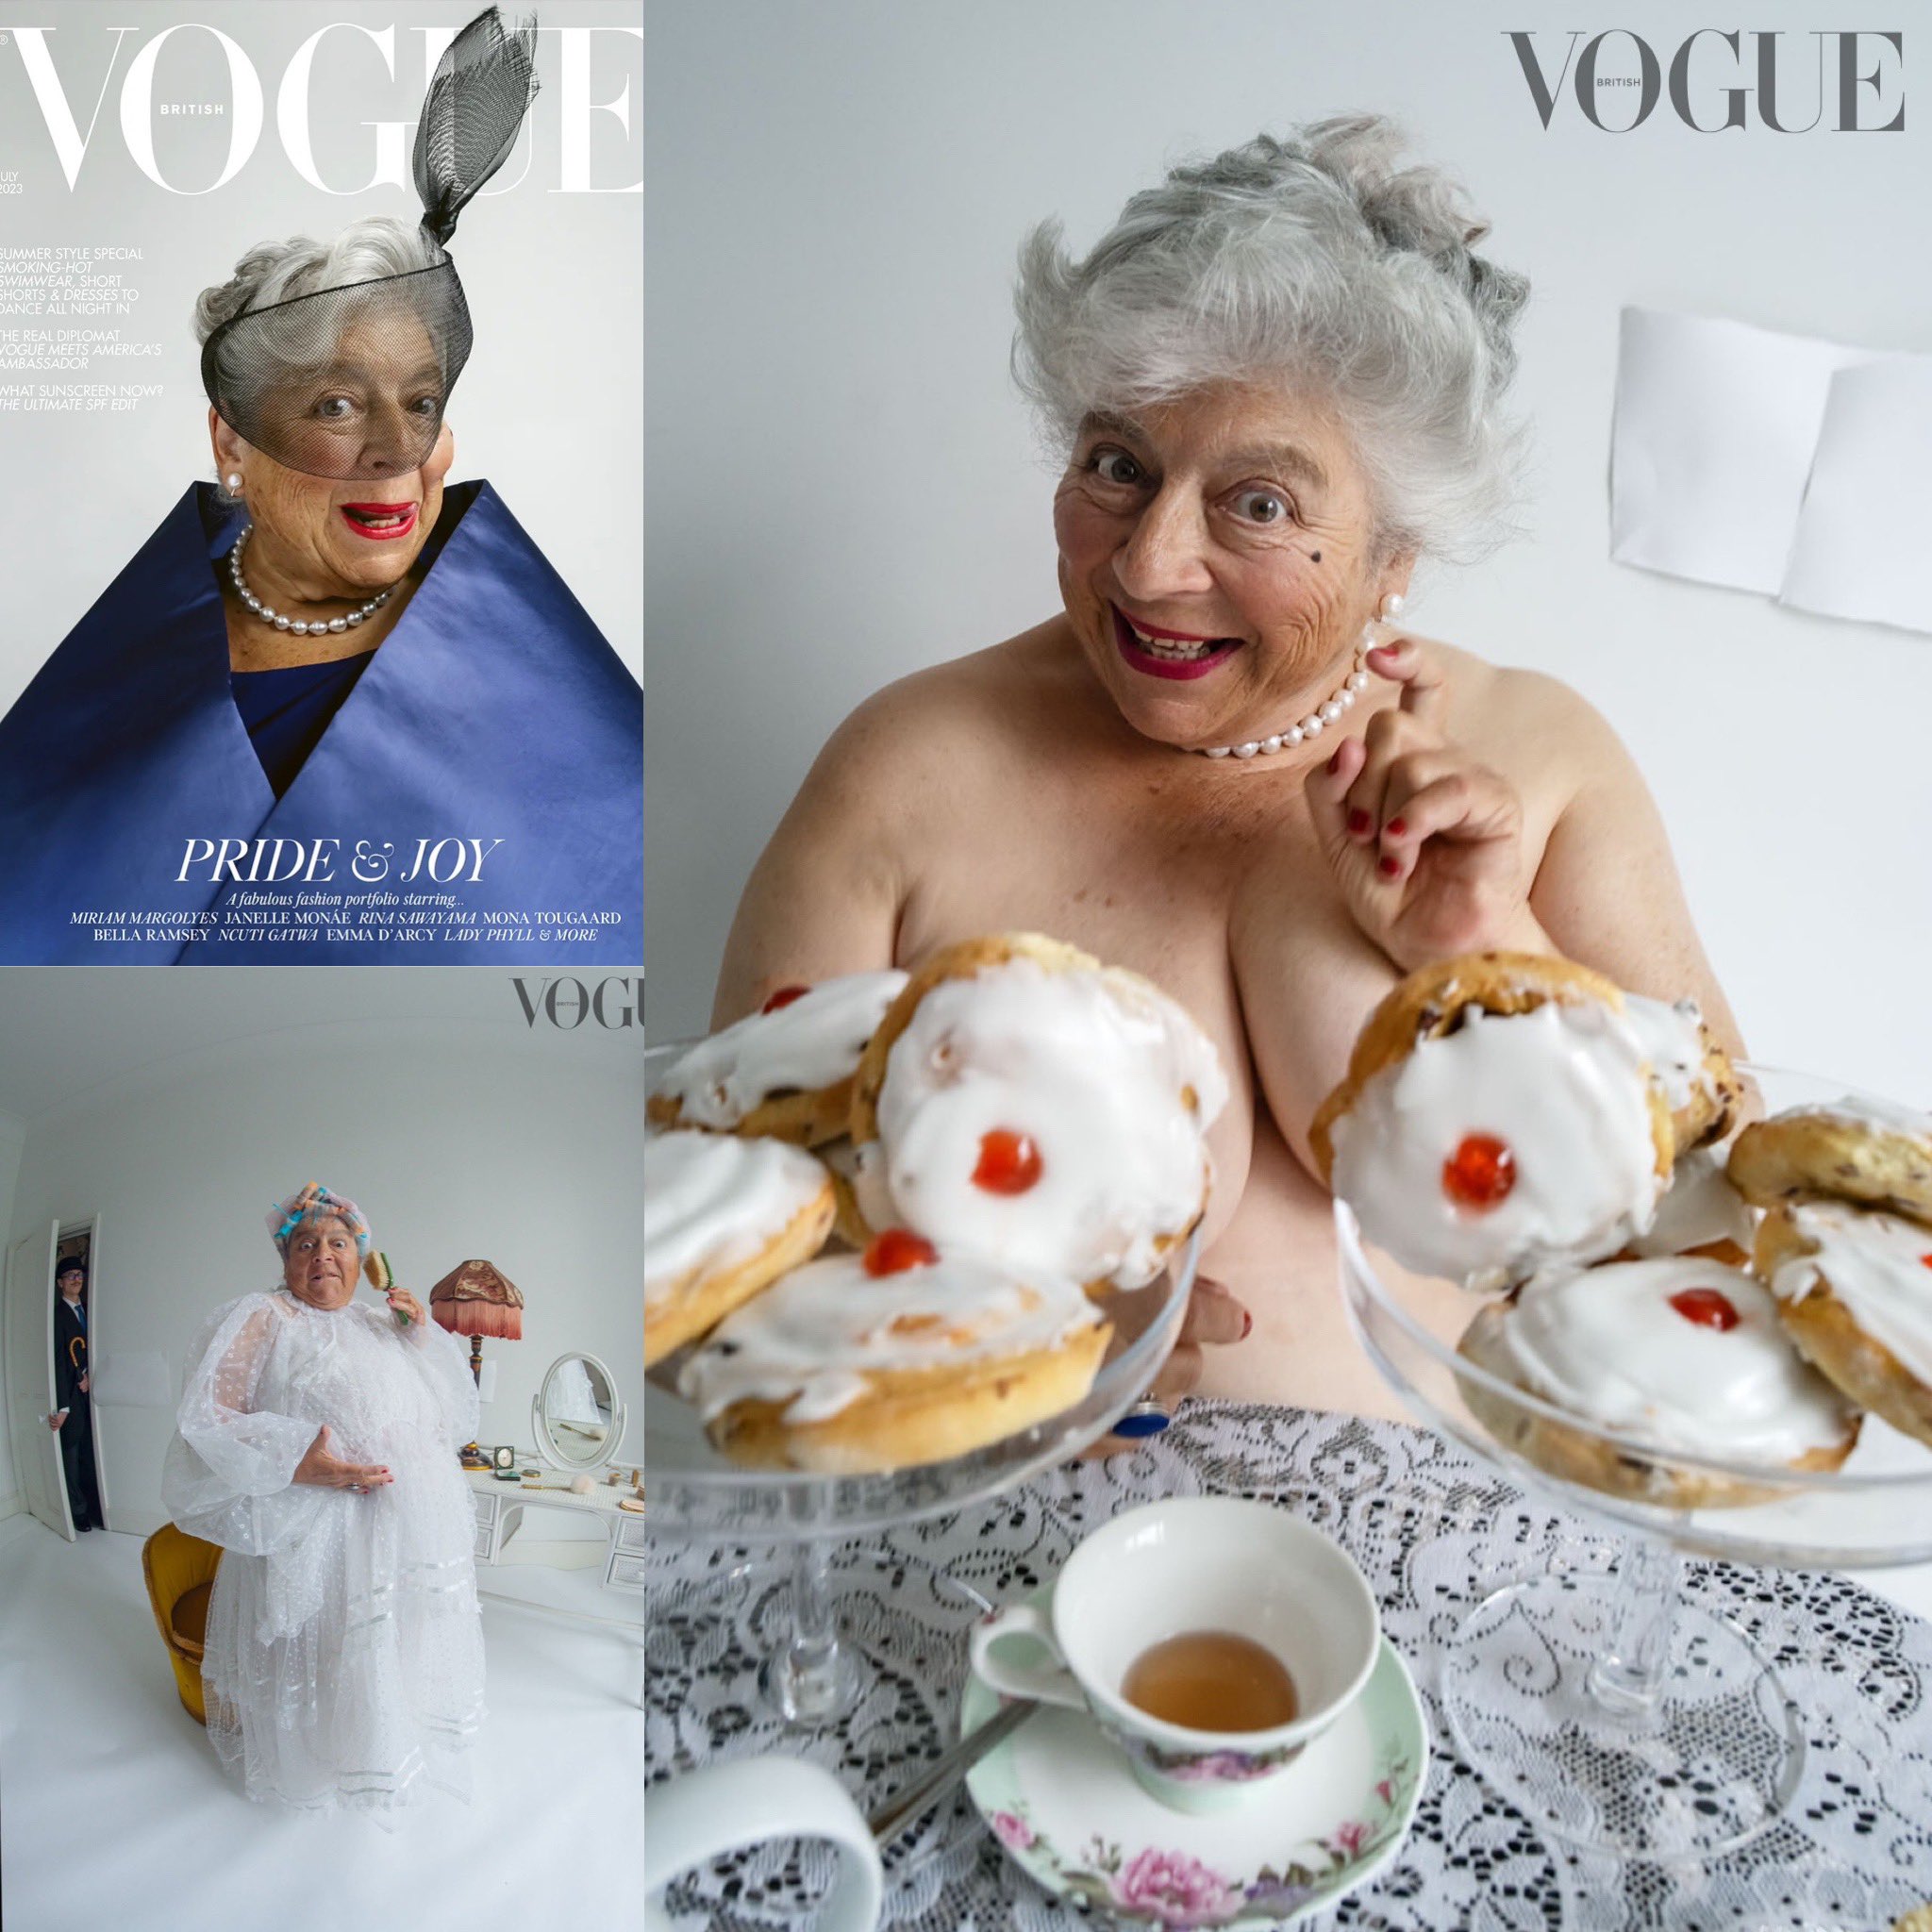 Lewis on Twitter: "Absolutely OBSESSED with Miriam Margolyes' British Vogue shoot!!! https://t.co/WLmZSlzWT4" / Twitter